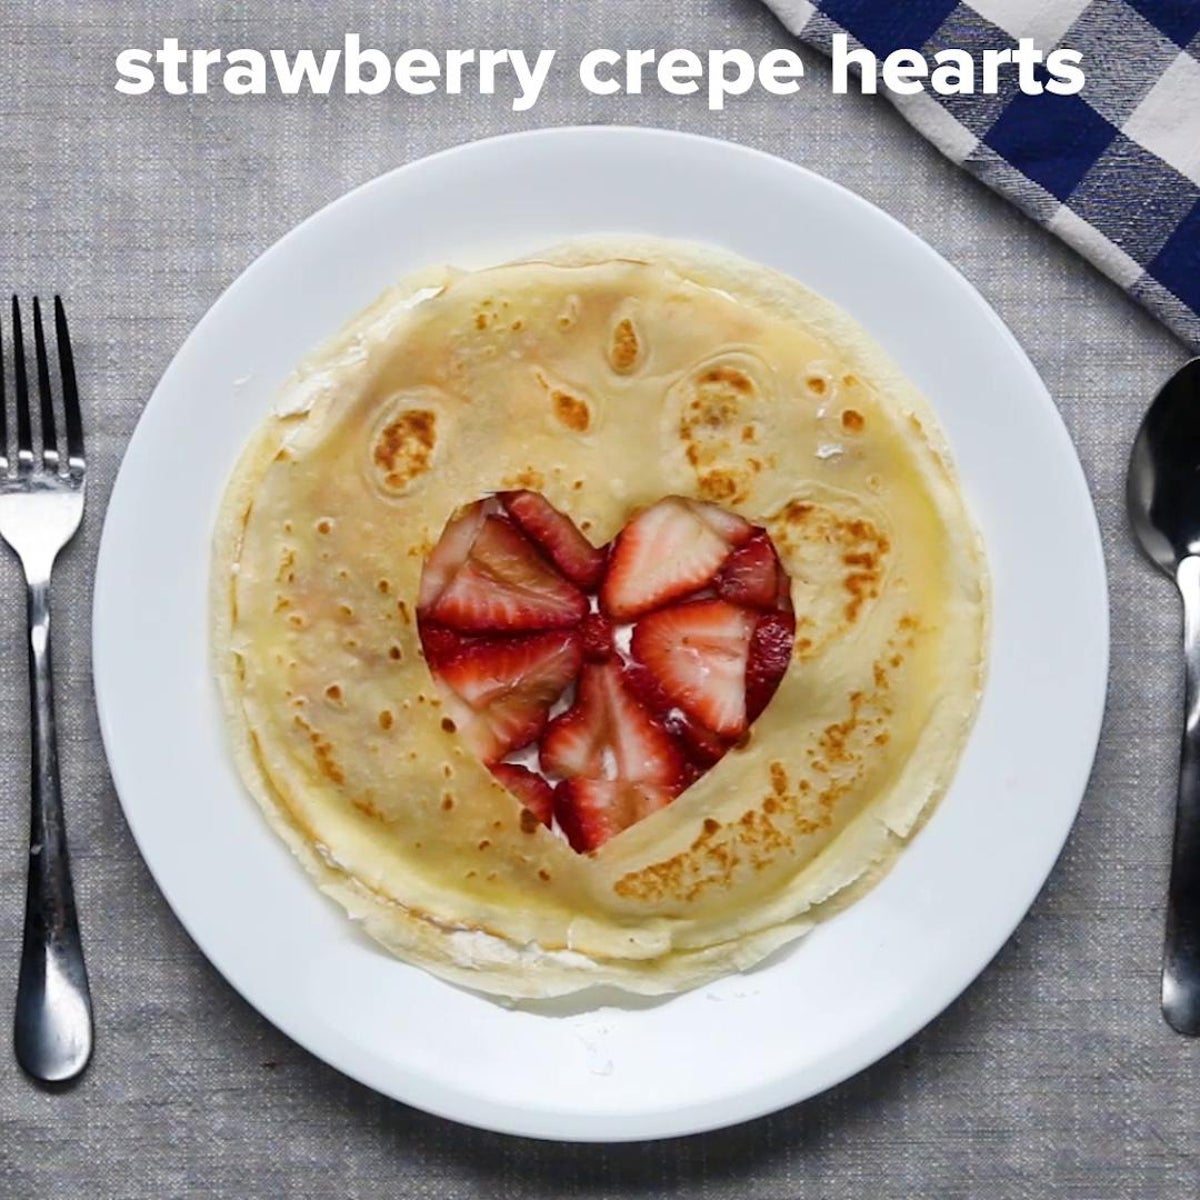 Strawberry Crepe Hearts Recipe by Tasty image